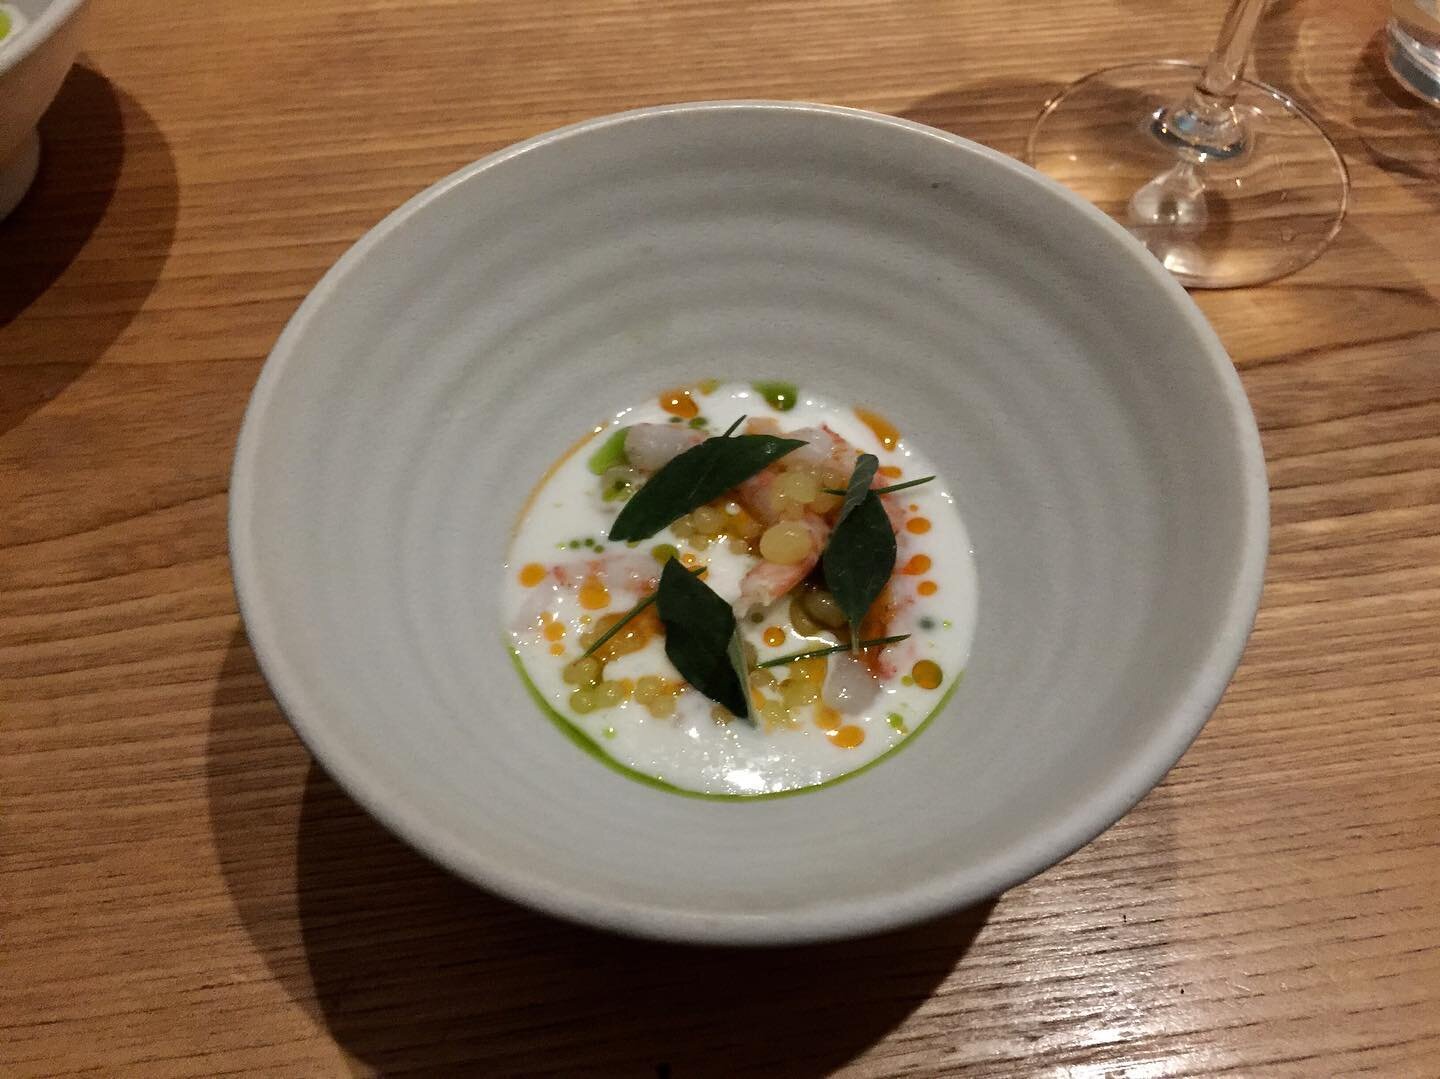 One of the pluses with delaying our return because of Covid was to be able to have a meal @james_southmelbourne A really considered set of dishes gave us both a wonderful meal and a chance to see the tableware we delivered to them 5 weeks ago in crea